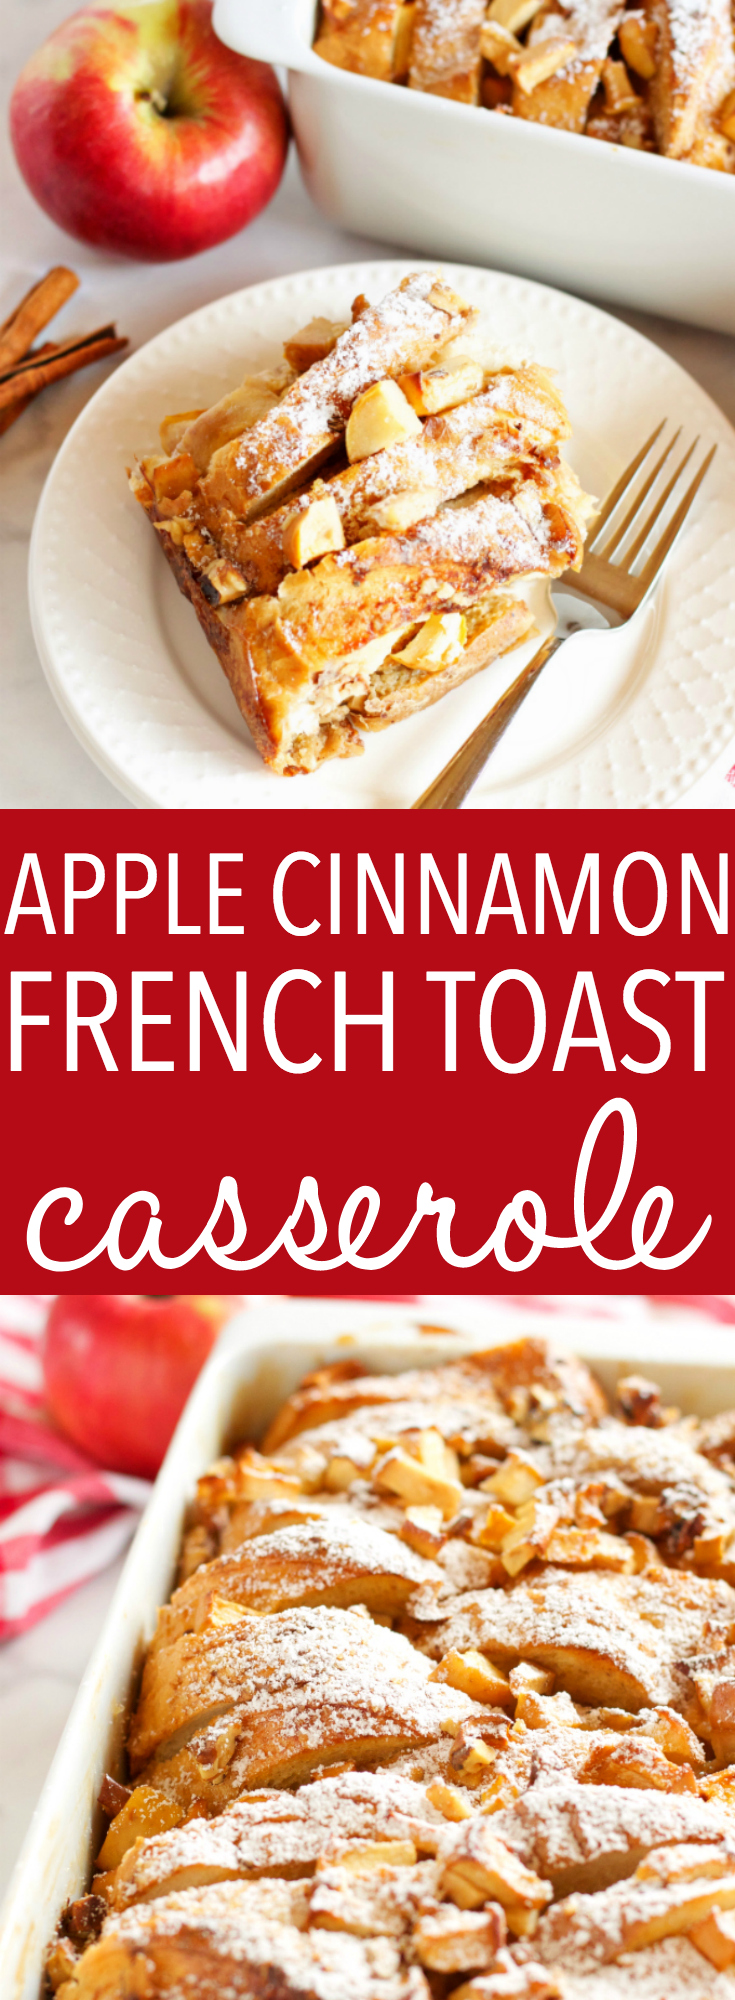 This Apple Cinnamon French Toast Casserole is the perfect holiday breakfast entertaining recipe made with fresh apples, pecans, and served with maple syrup! Recipe from thebusybaker.ca! #holidaybreakfastrecipe #holidayrecipe #christmasbreakfast #easyholidaybreakfast via @busybakerblog